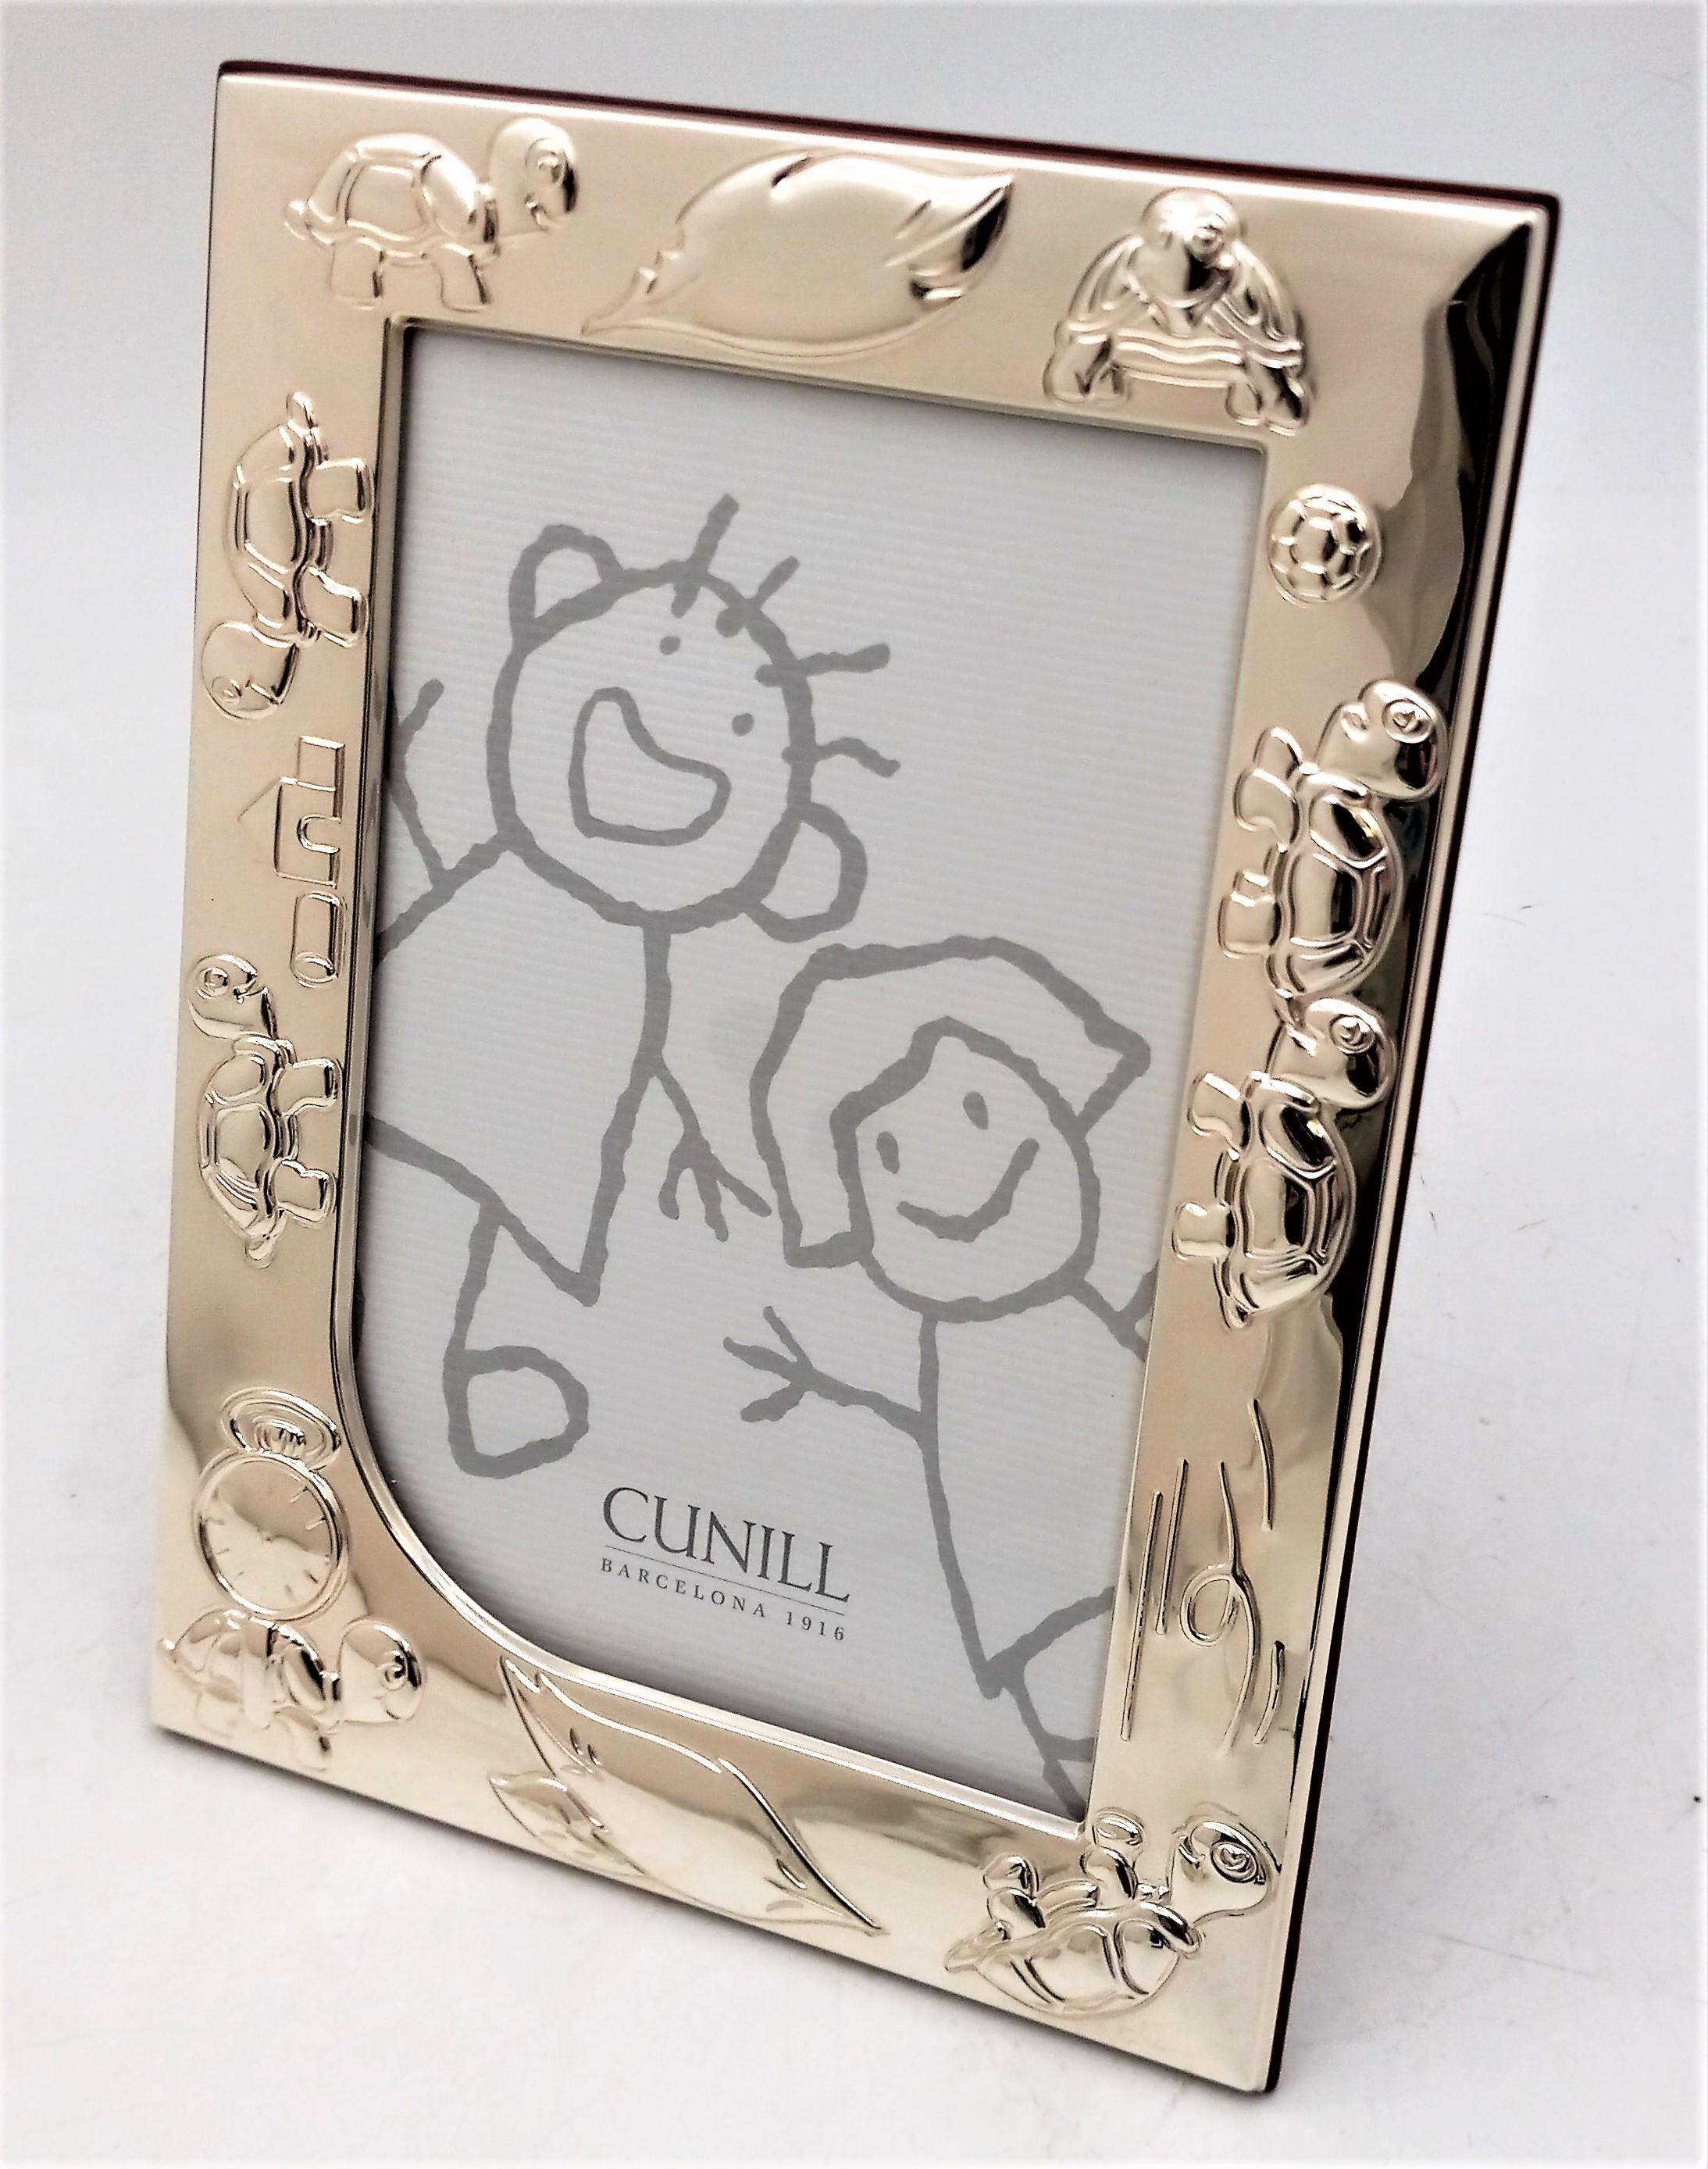 A sterling silver picture frame by Cunill. Burgandy-painted wood easel backing and a silver clasp to secure that the backing is closed. As seen, the front of the frame is decorated by frolicking turtles in a full border. Measures 5 3/4 inches wide